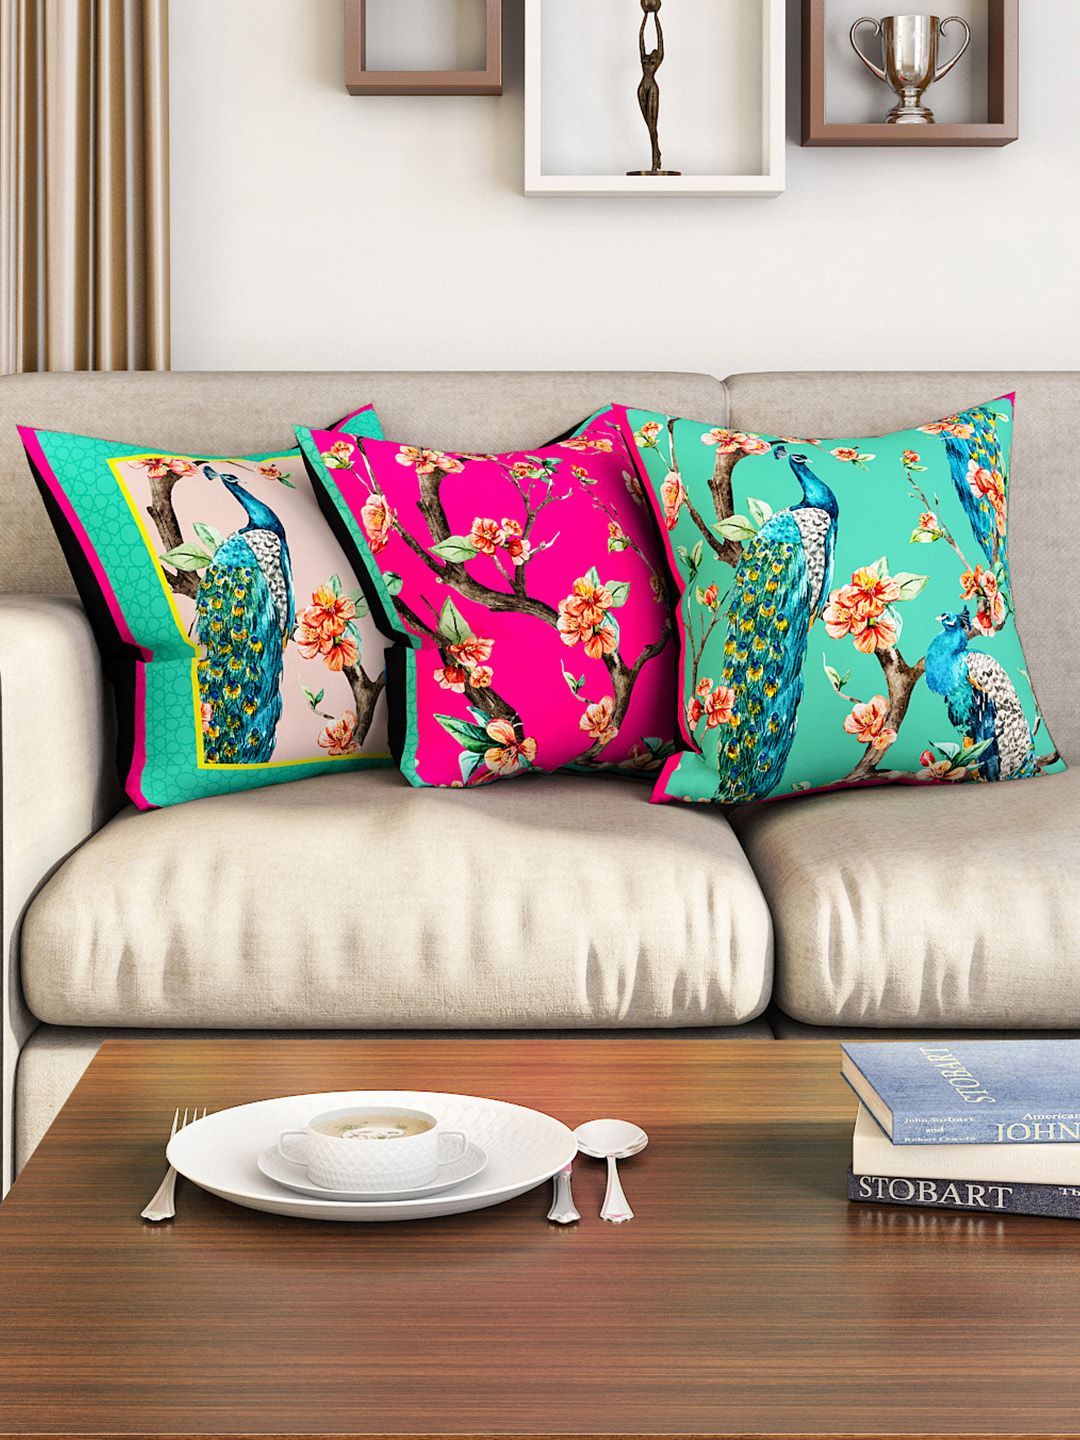 SEJ by Nisha Gupta Set of 3 Abstract Square Cushion Covers Price in India